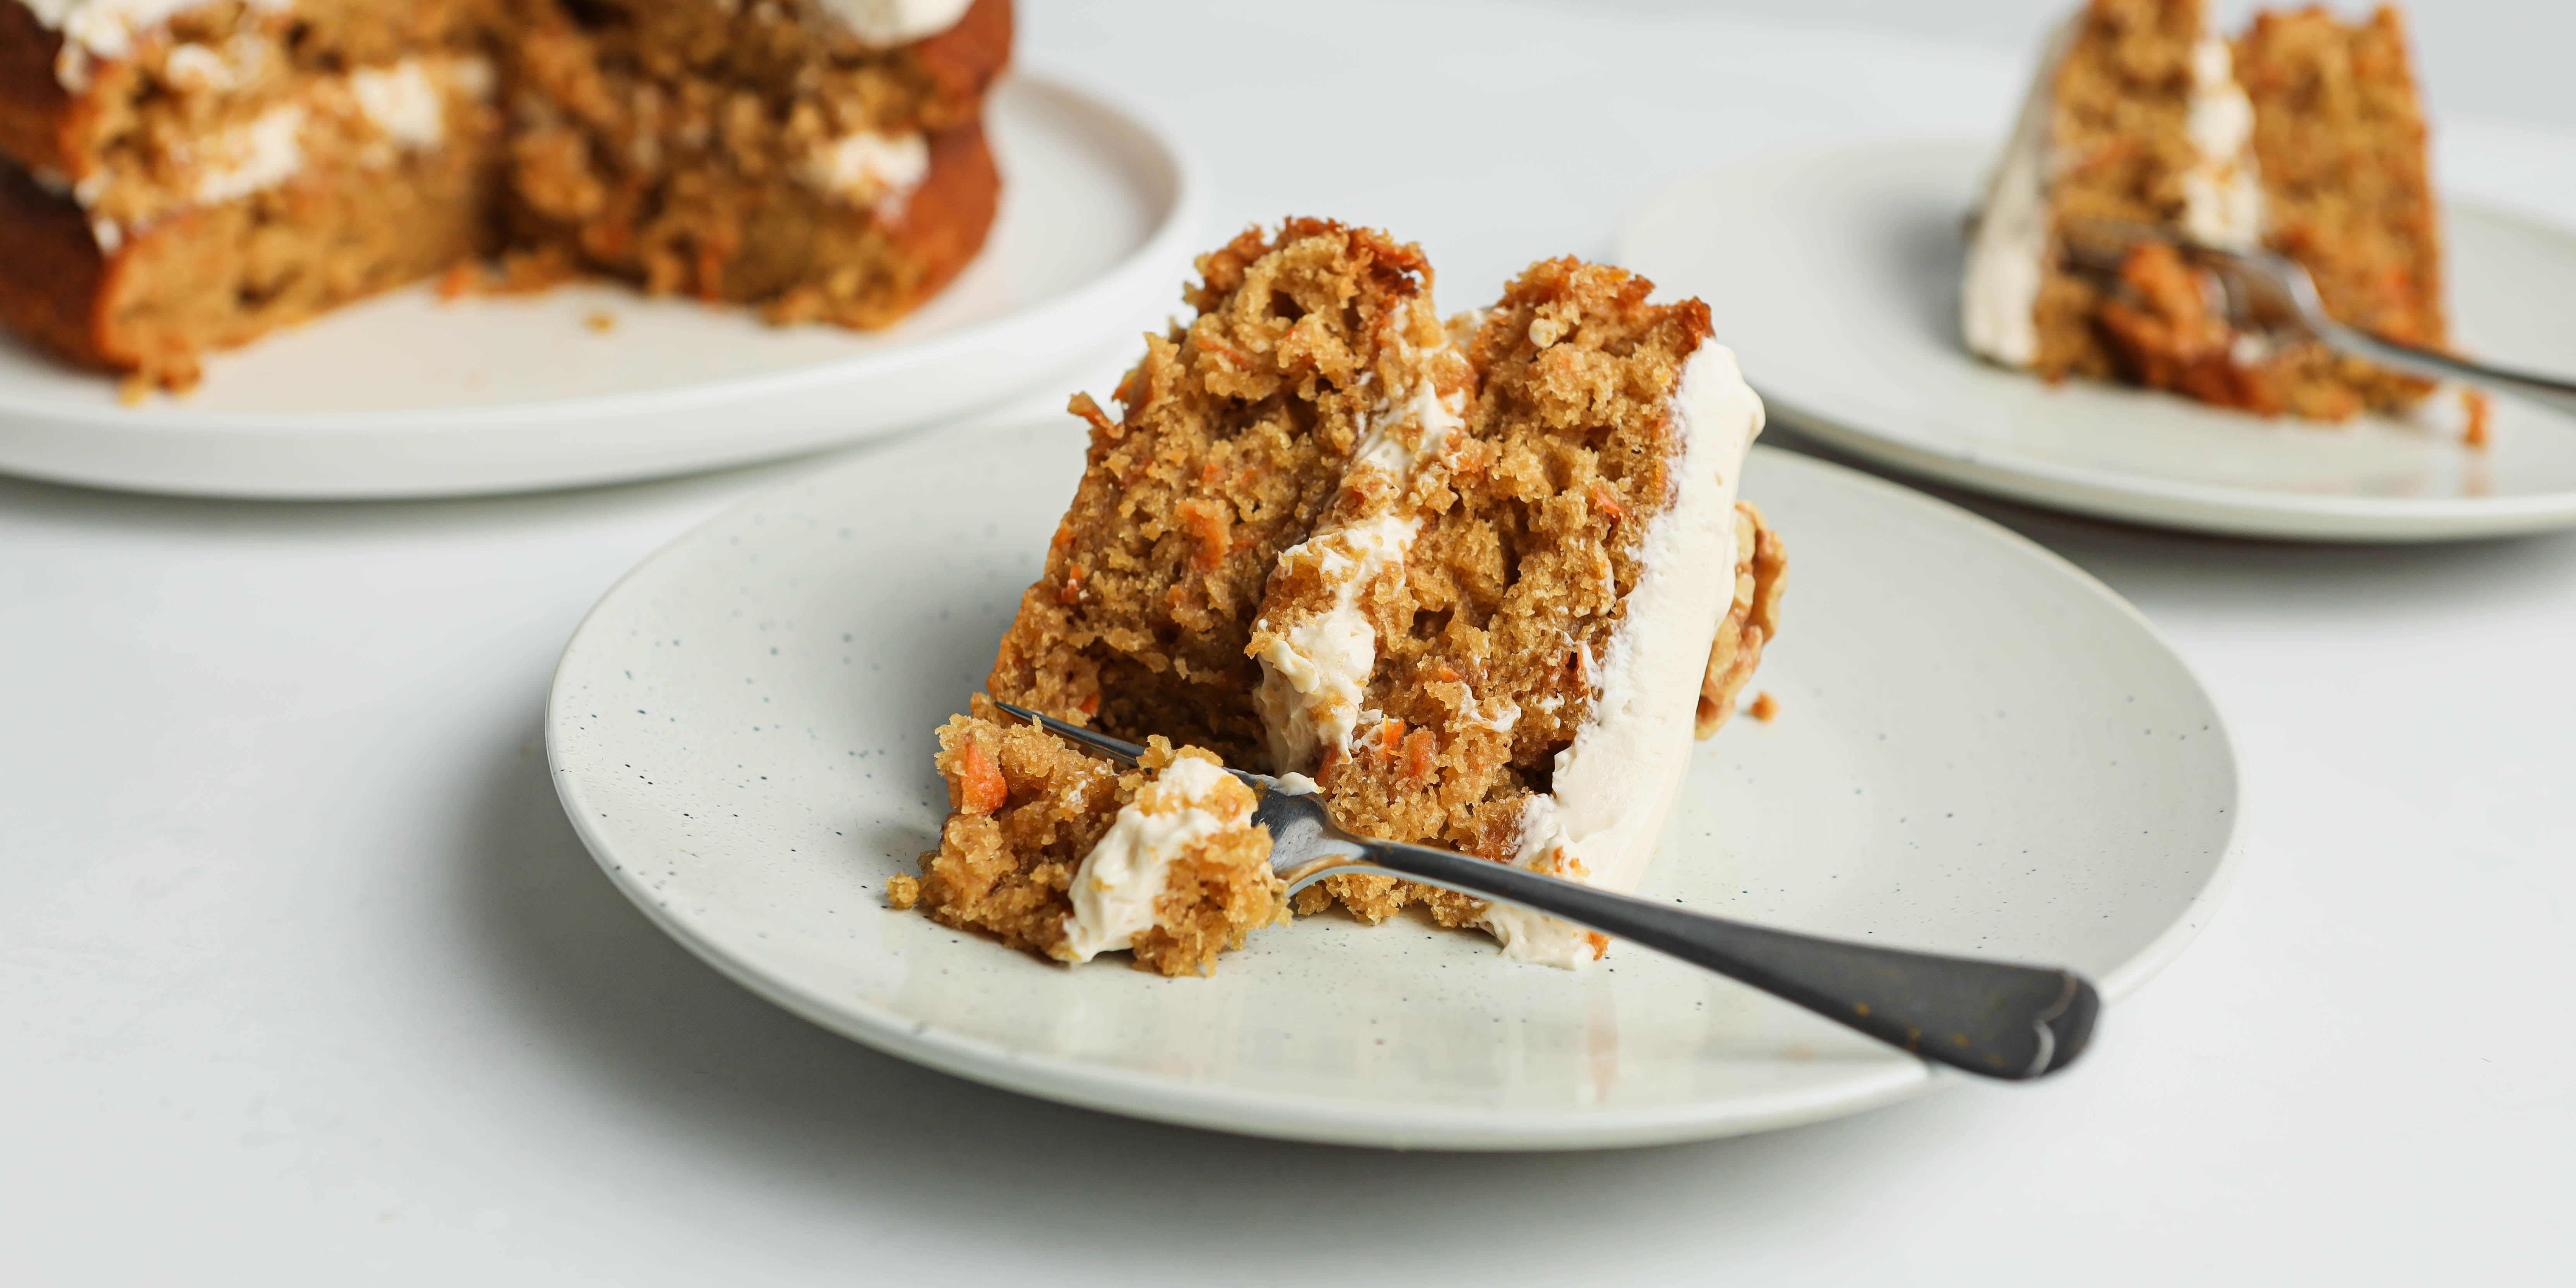 Mental Scoop - Crazy Carrot Cake Recipe – No Eggs, Milk or Butter  https://homegardendiy.com/crazy-carrot-cake-recipe-no-eggs-milk-or-butter/  Just like the other Crazy Cakes, this cake contains no eggs, milk or  butter, is super moist and